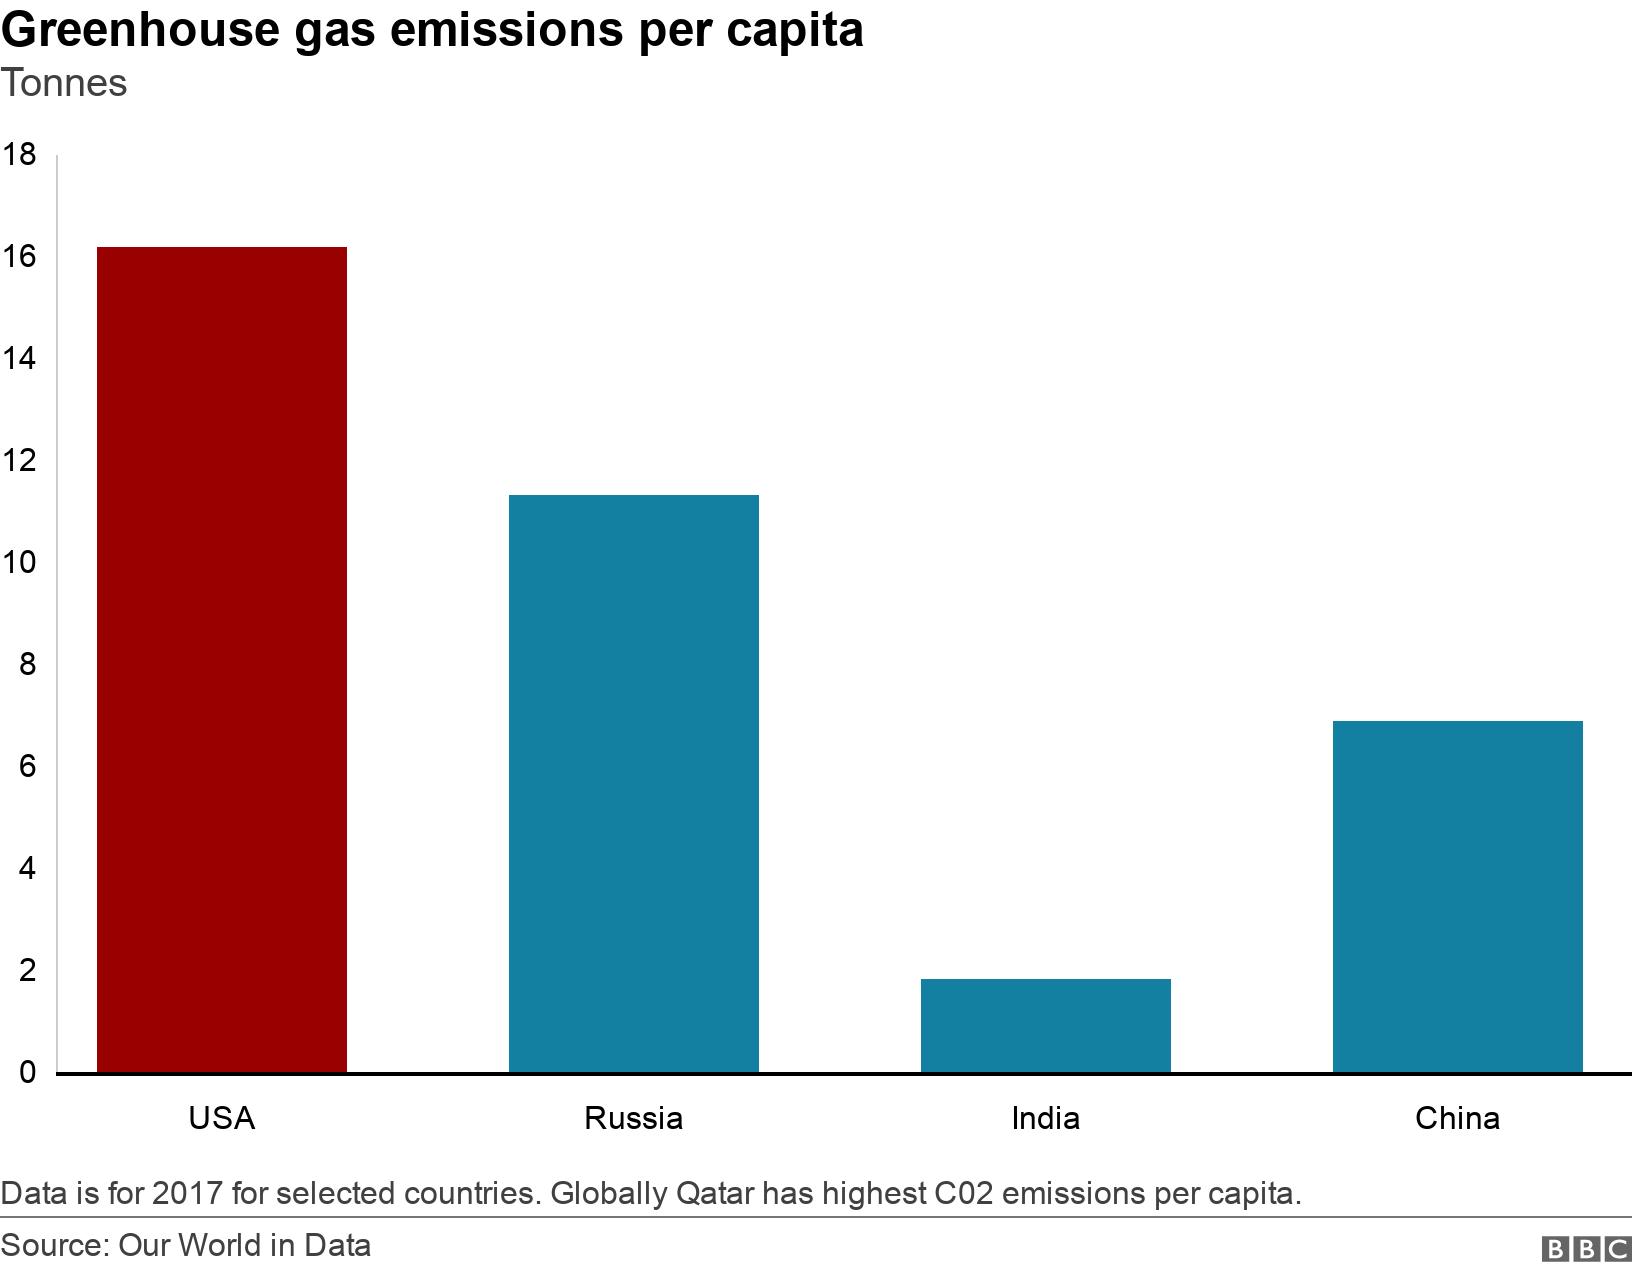 Greenhouse gas emissions per capita. Tonnes. Data is for 2017 for selected countries. Globally Qatar has highest C02 emissions per capita..